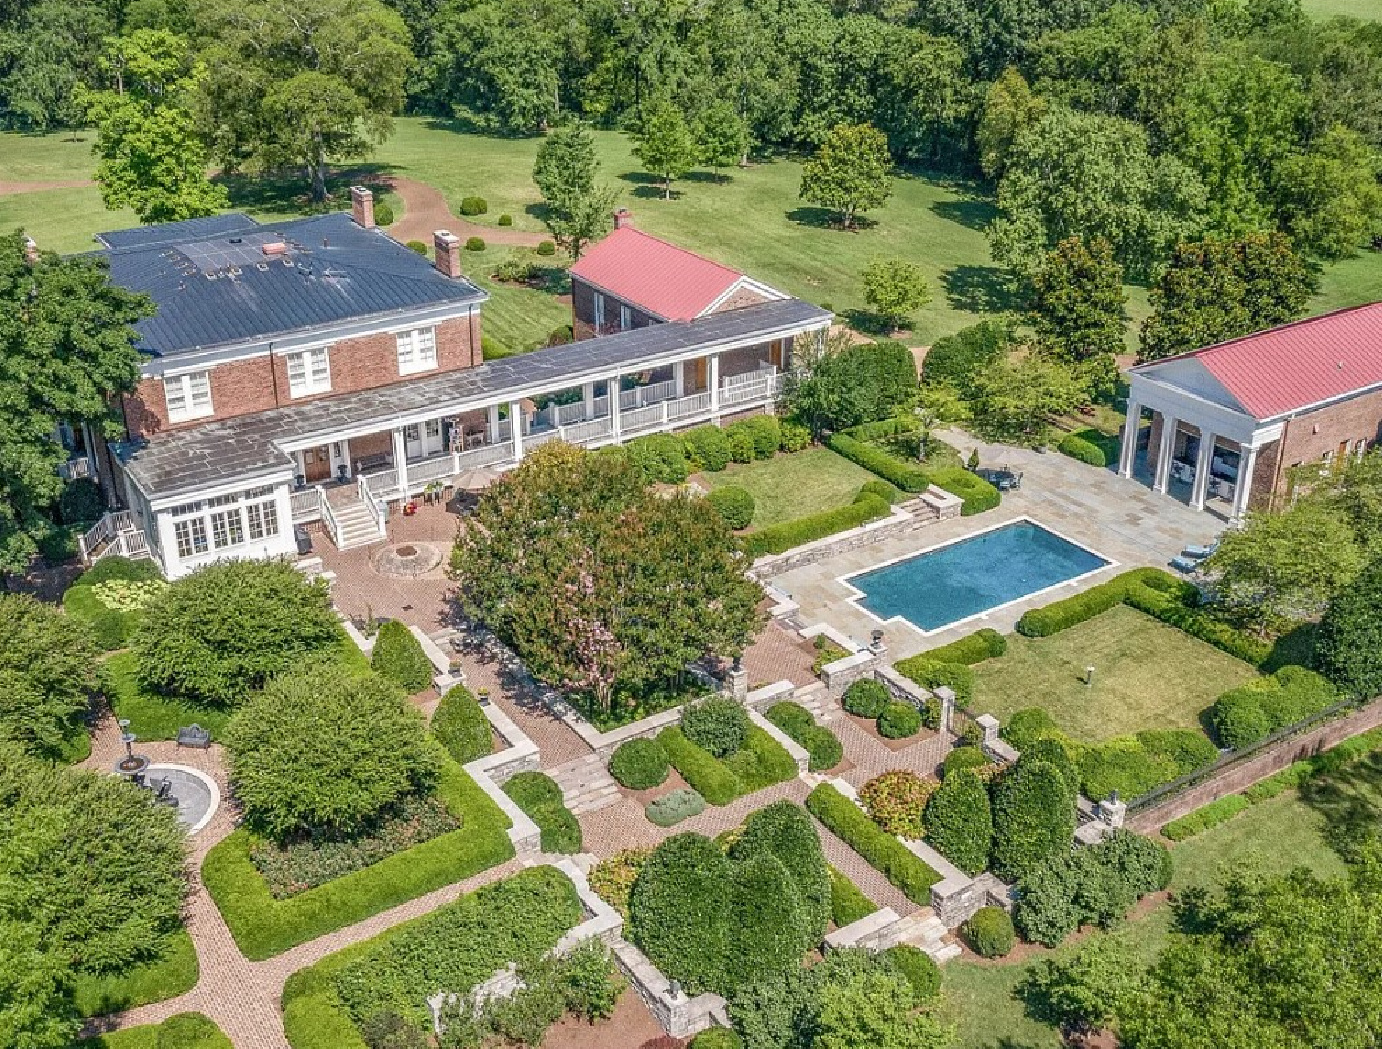 Stunning aerial view of a beautiful 1836 property in Franklin, TN (Old Hillsboro) with formal gardens and pool.